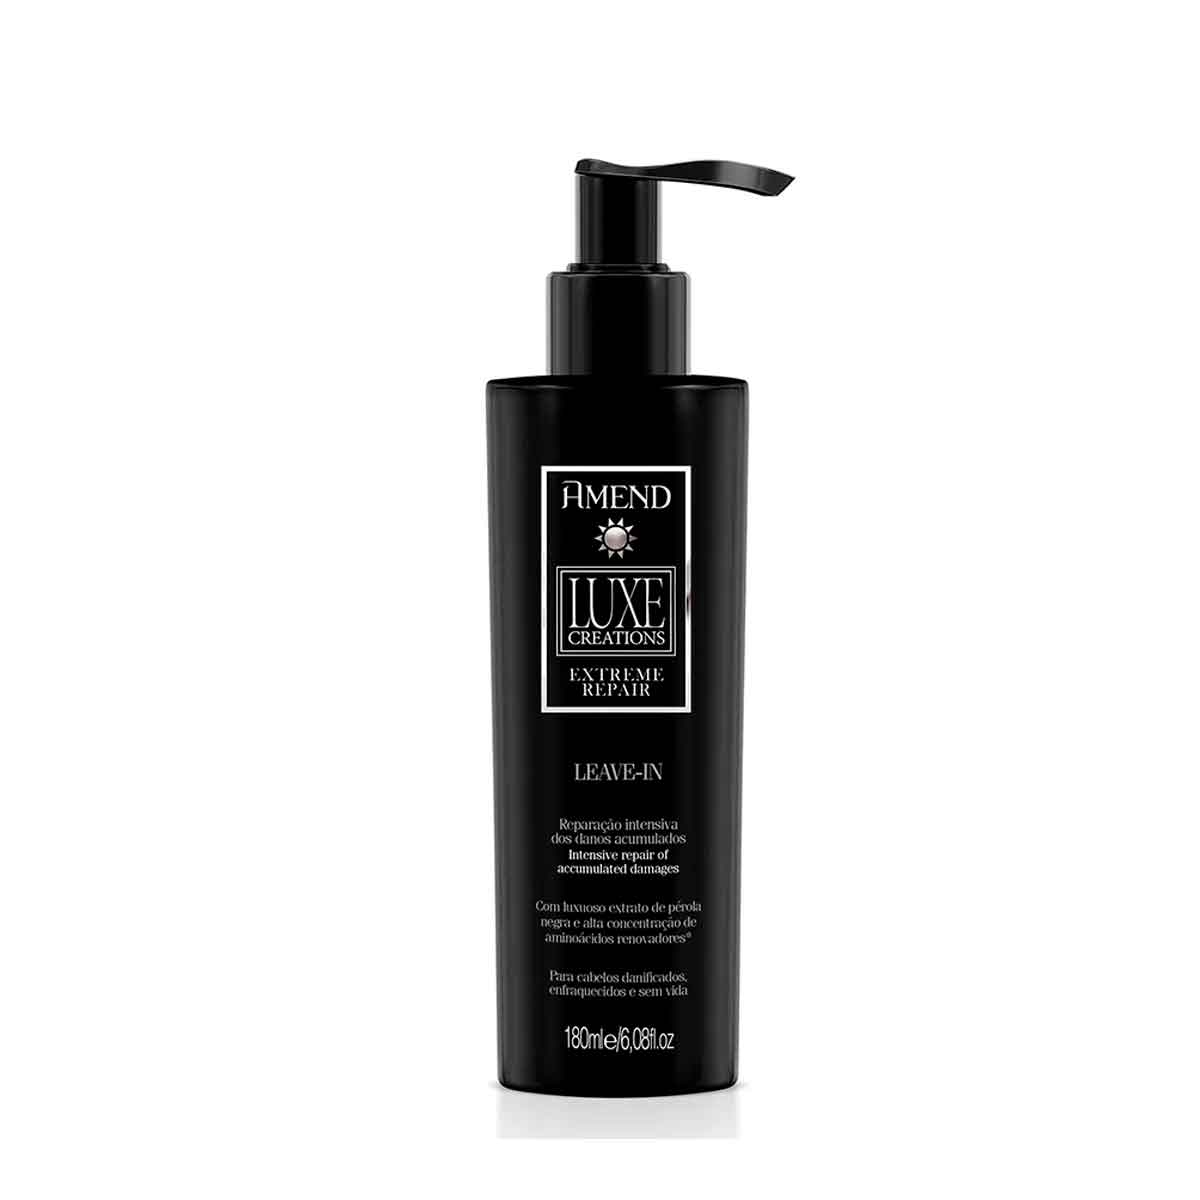 Leave-in Amend Luxe Creations Extreme Treatment com 180ml 180ml